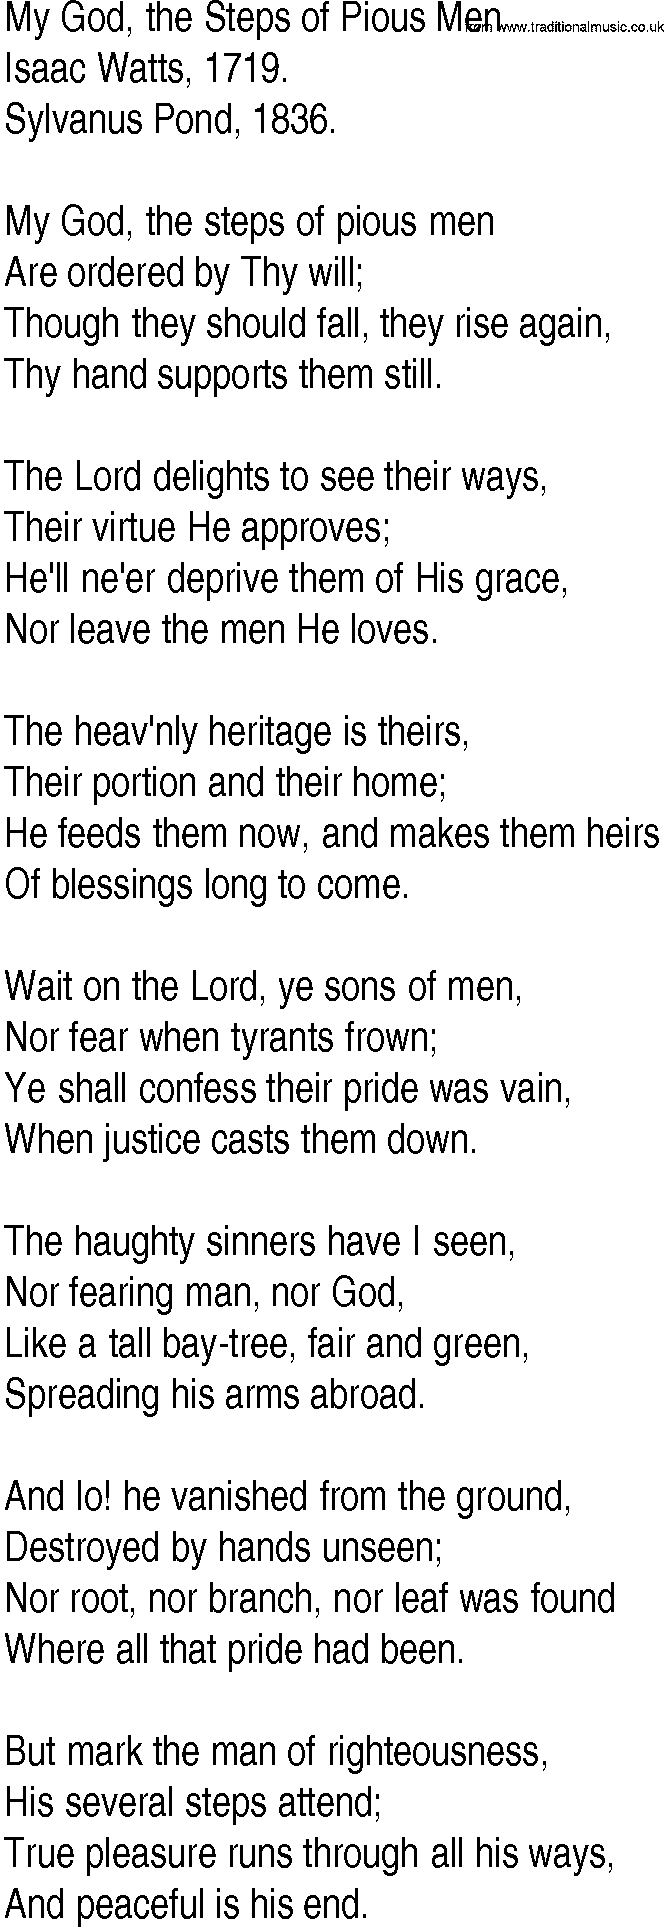 Hymn and Gospel Song: My God, the Steps of Pious Men by Isaac Watts lyrics